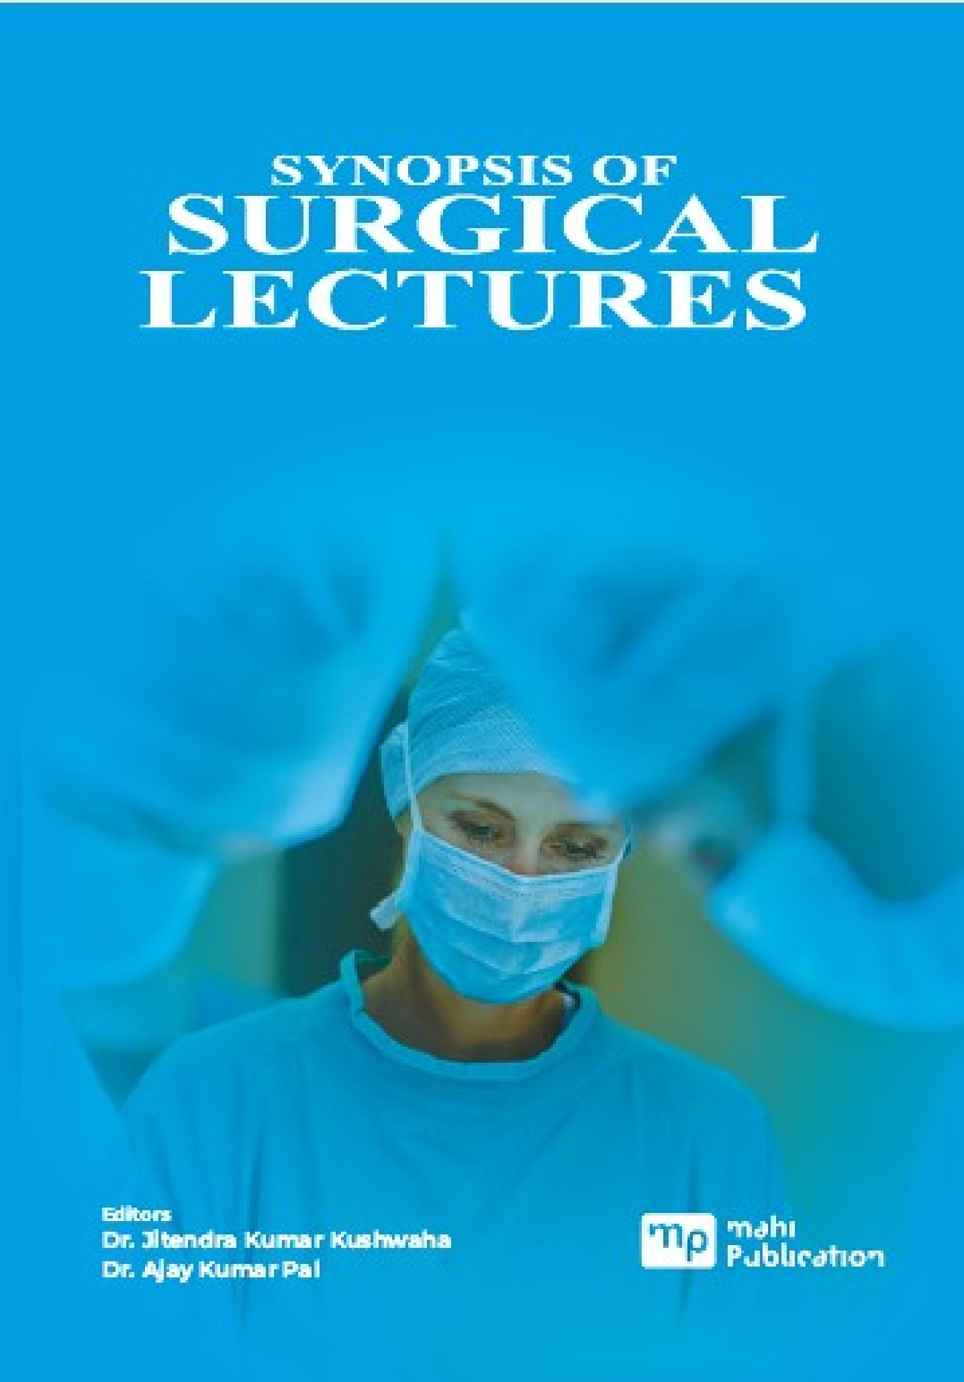 Synopsis of Surgical Lectures